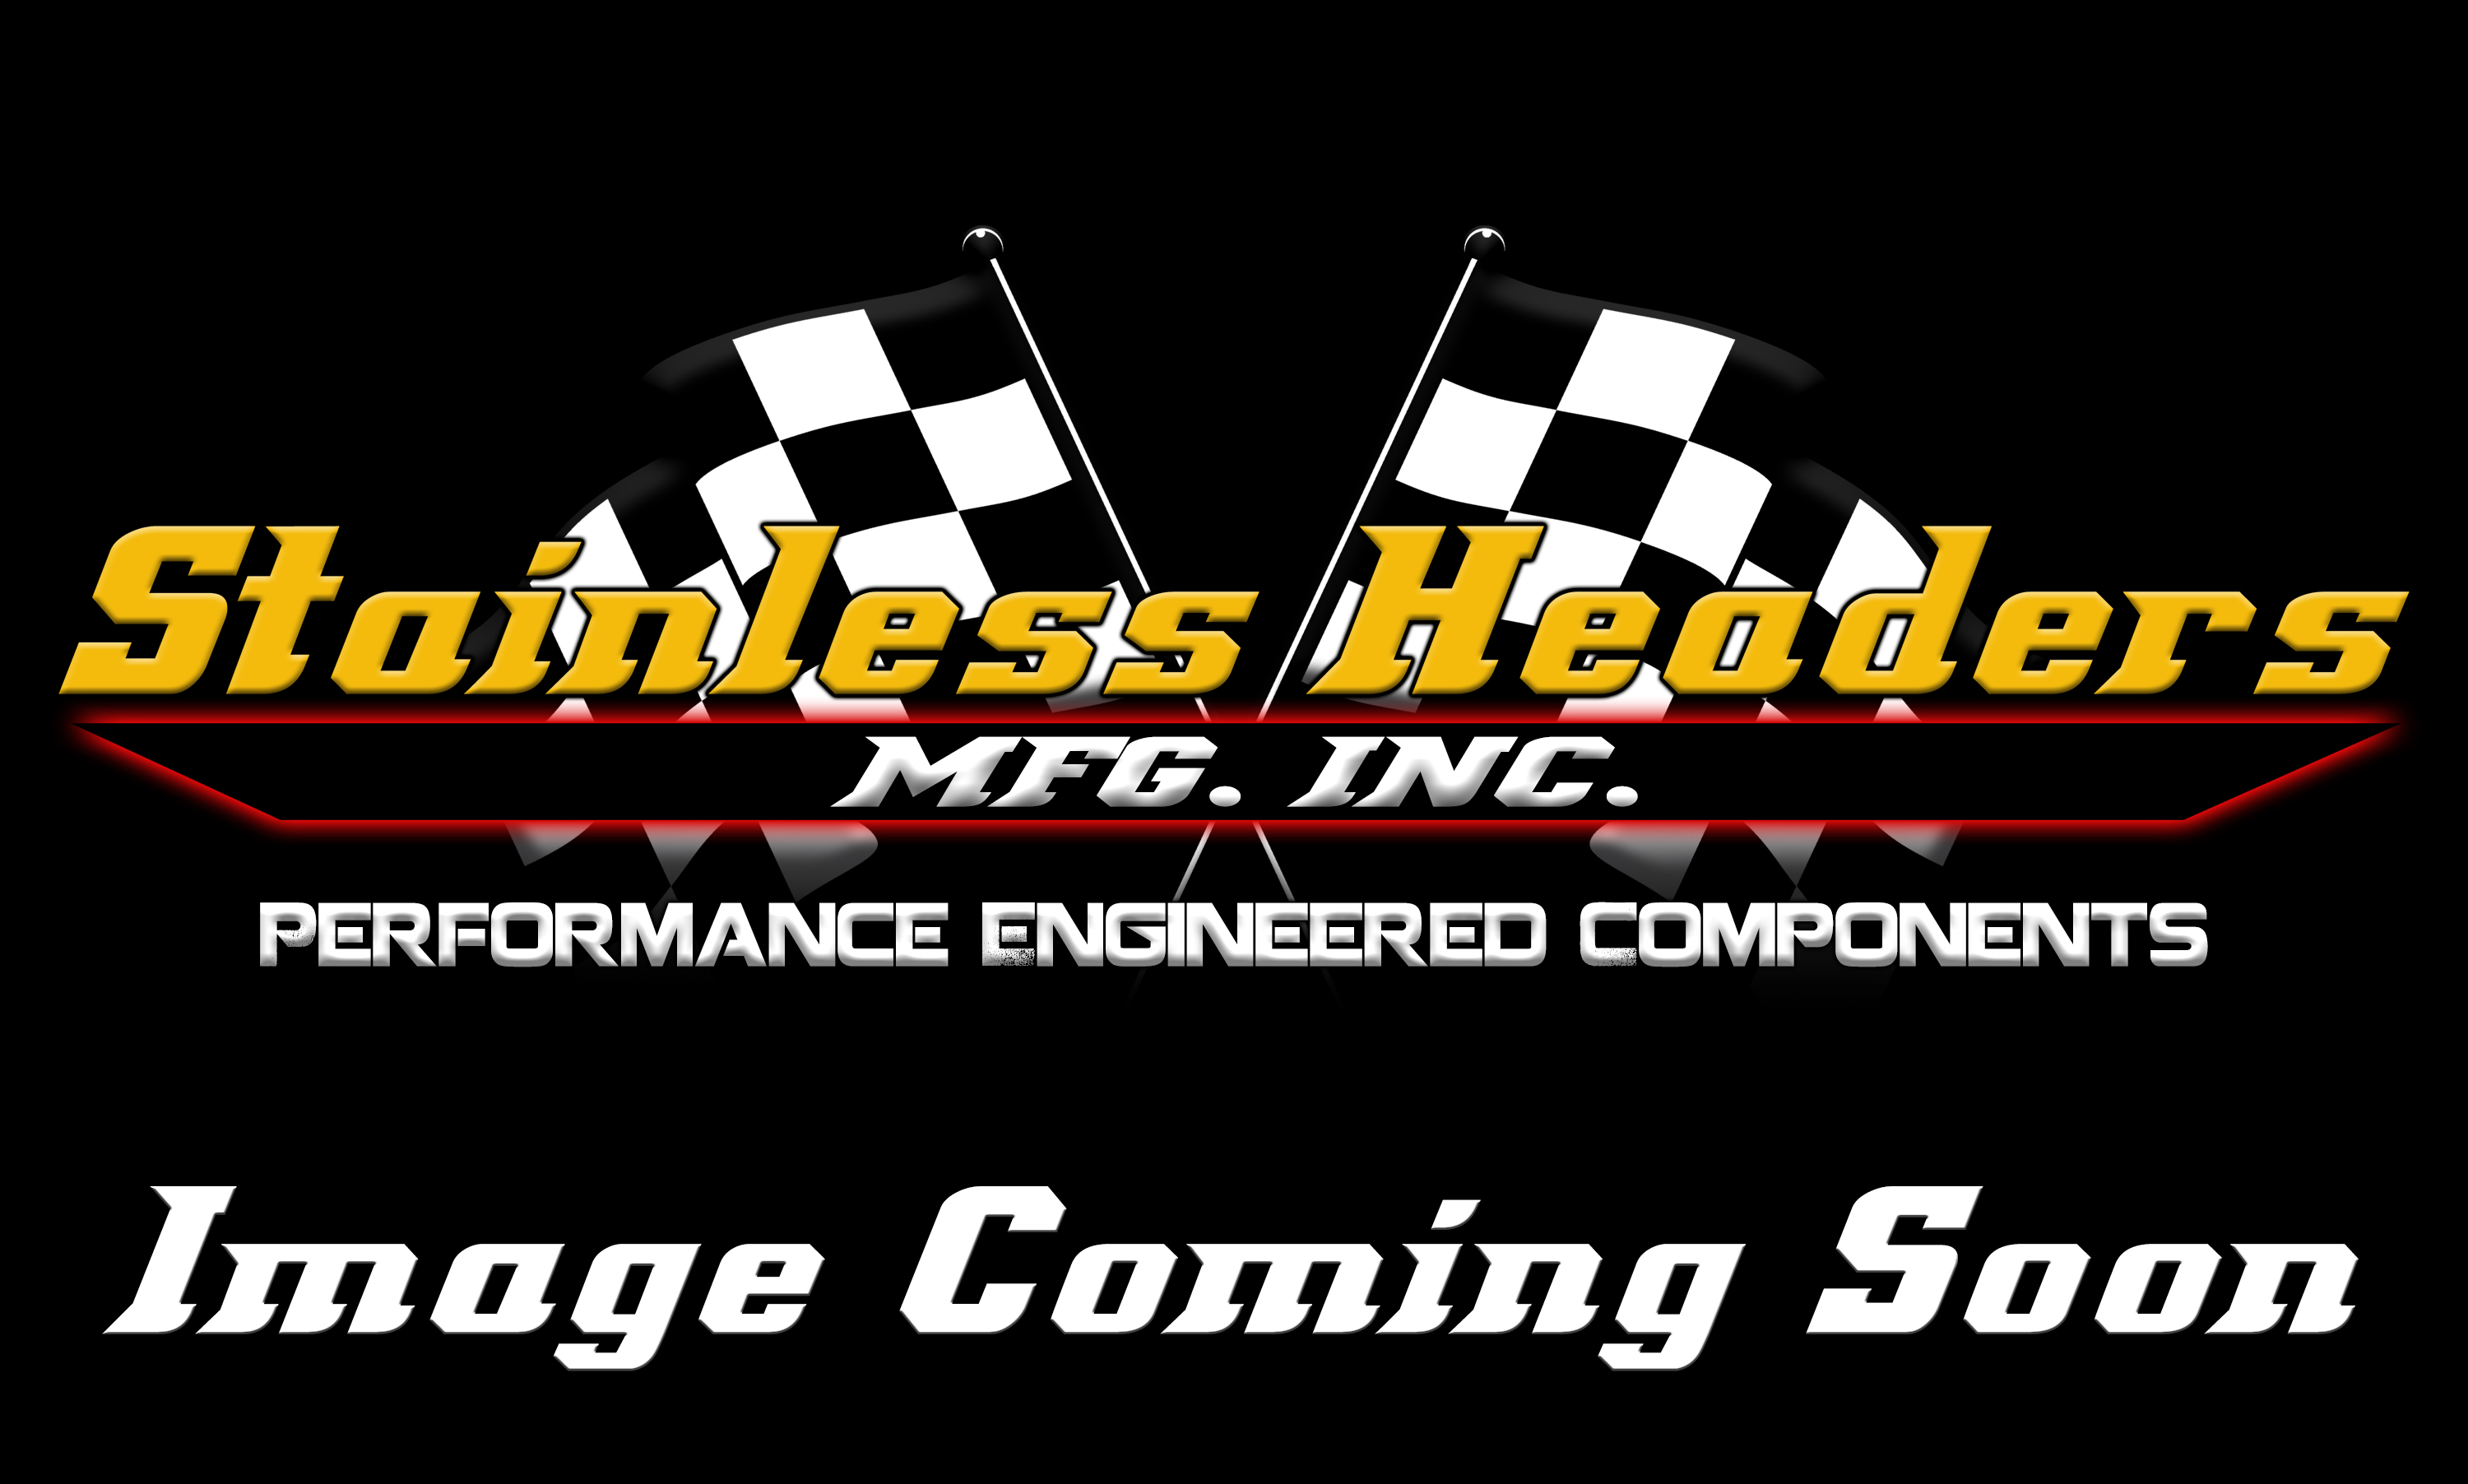 Stainless Headers - 2 1/4" Primary 6 into 1 Performance Merge Collector-16ga 304ss - Image 3